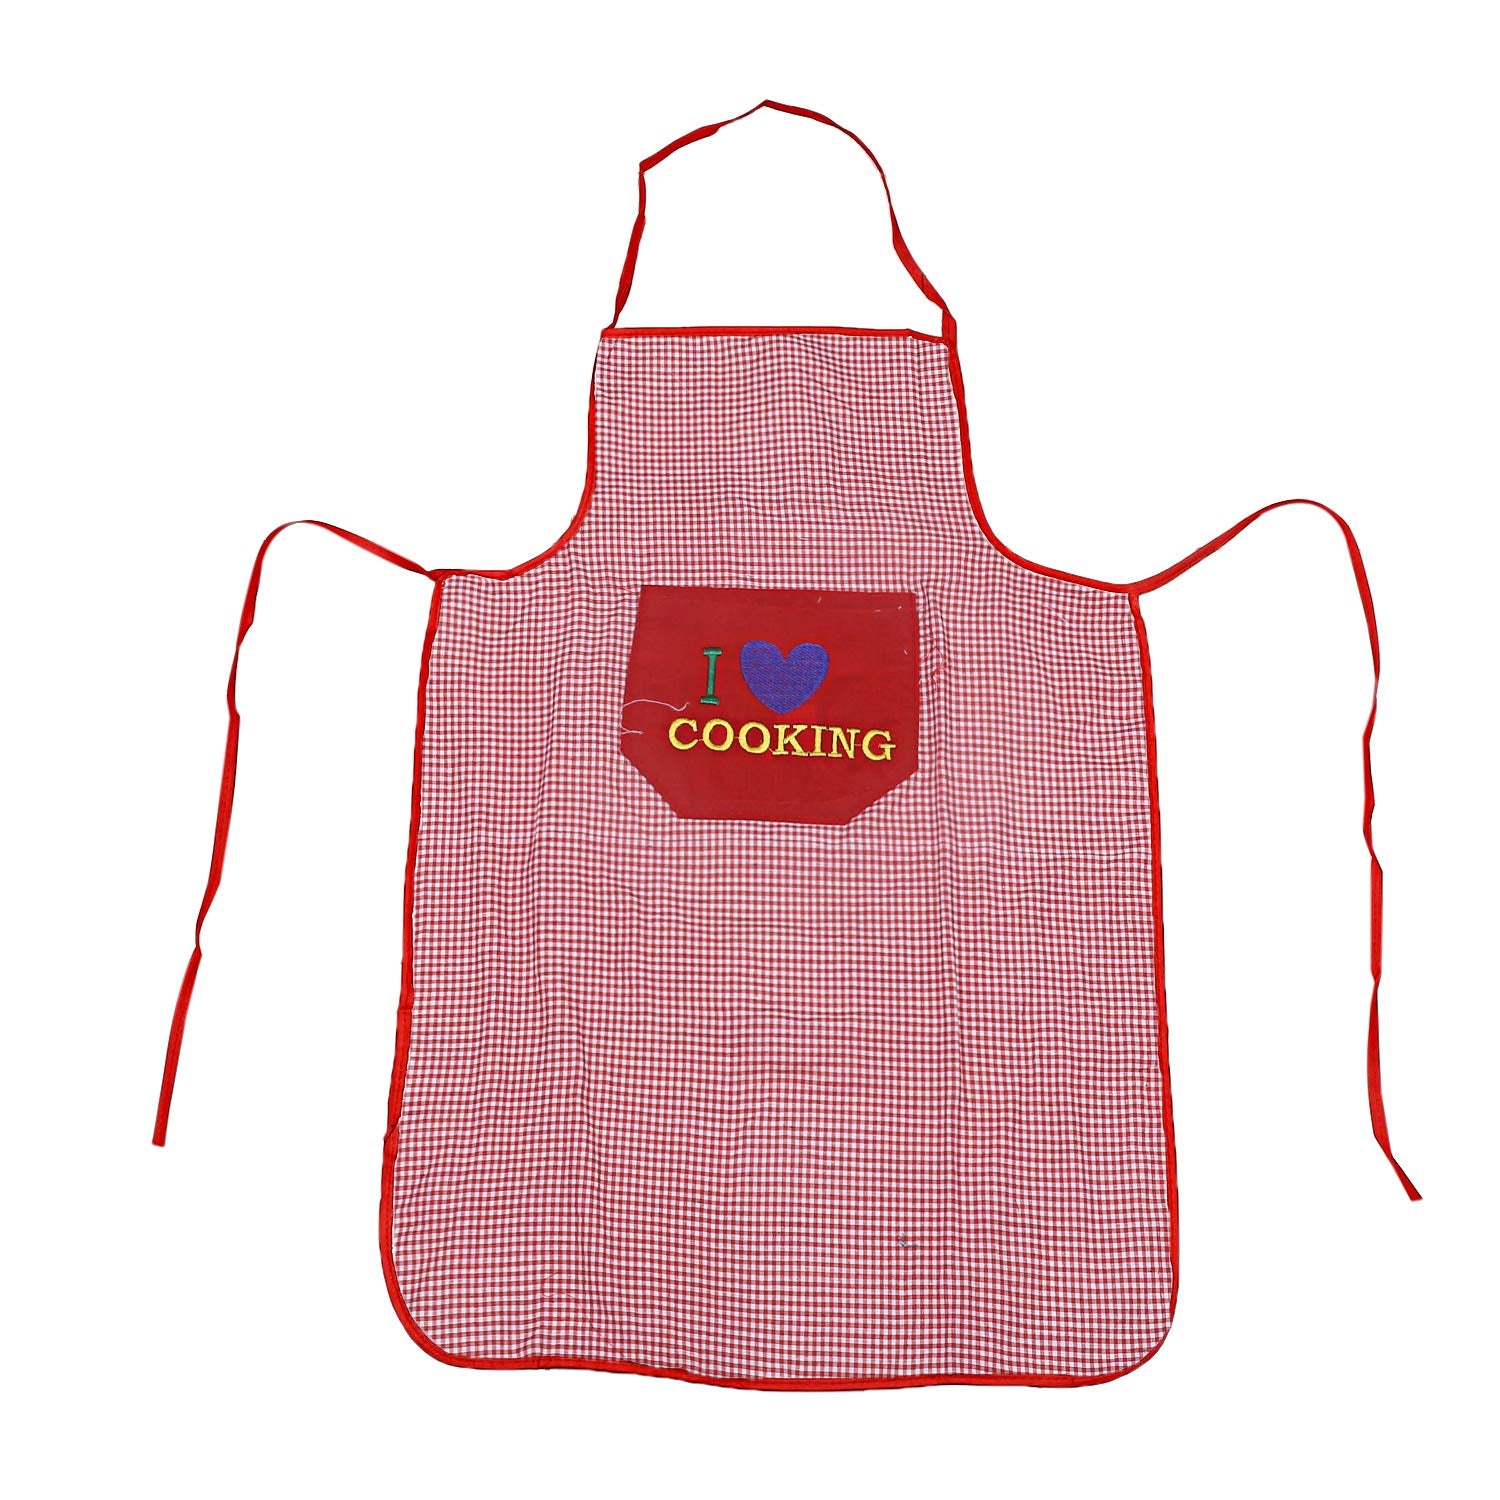 Kuber Industries Apron For Men And Woman|Waterproof Apron For Kitchen|Designer Front Pocket|RED